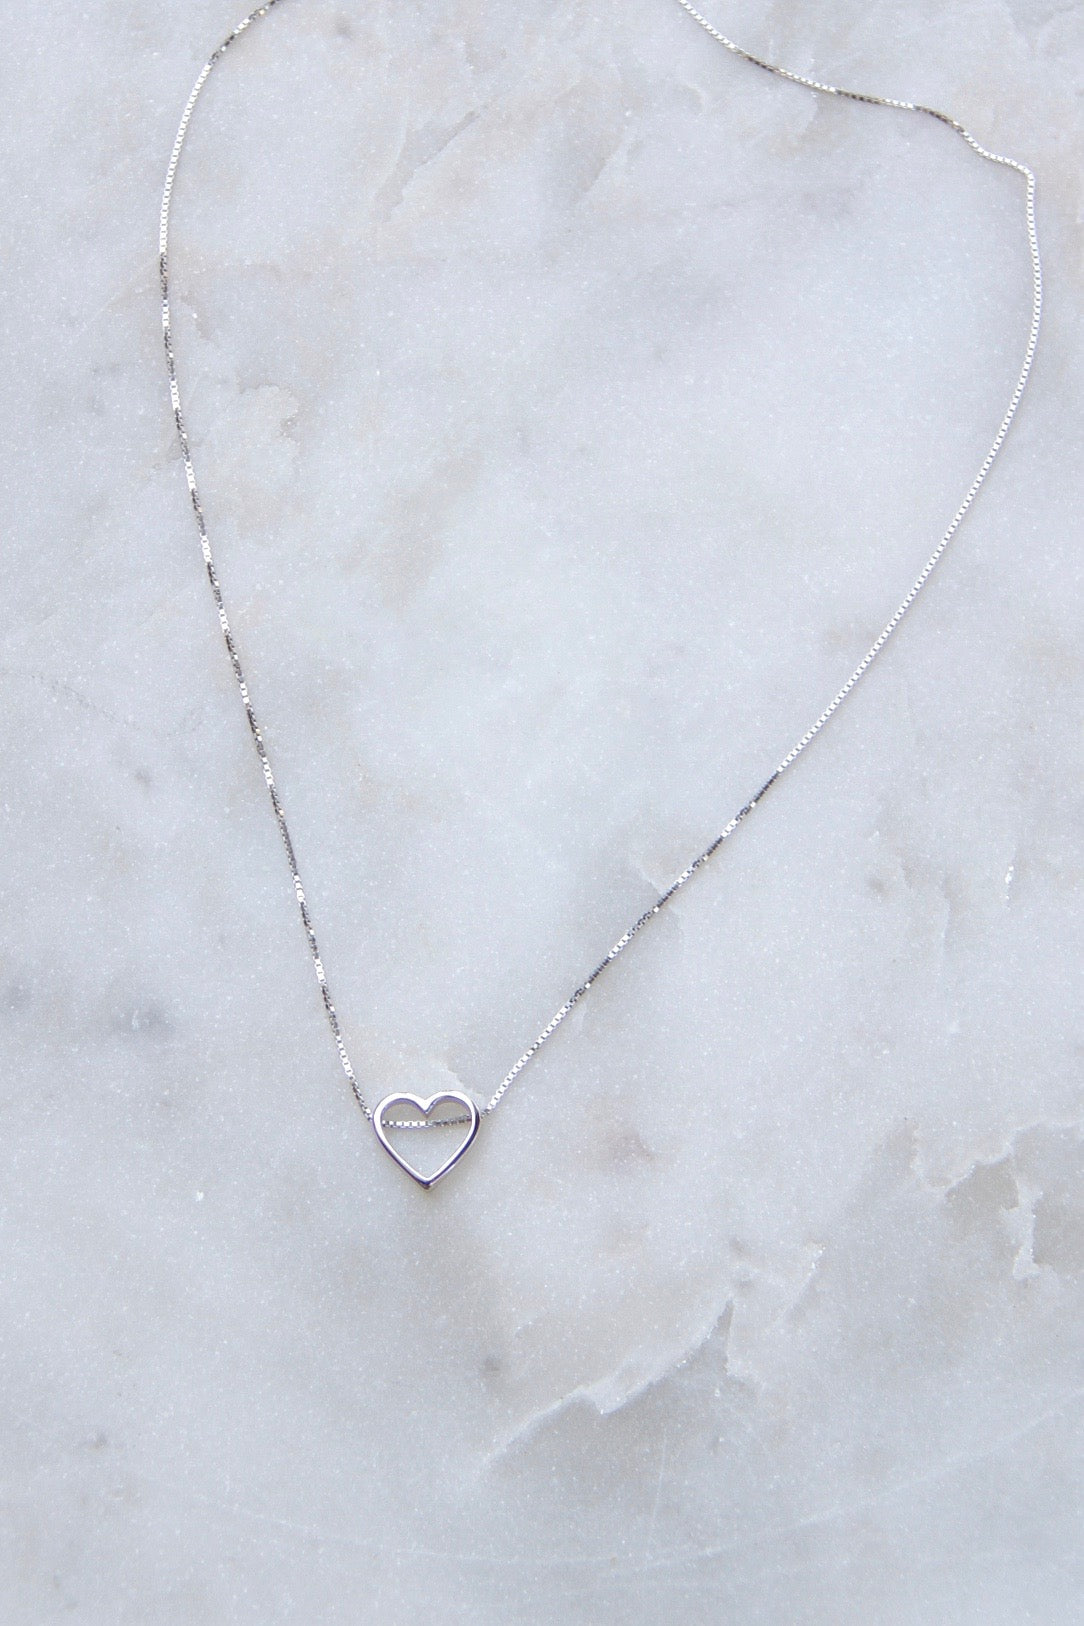 Heart Pendant Necklace in 925 Silver - Kardia